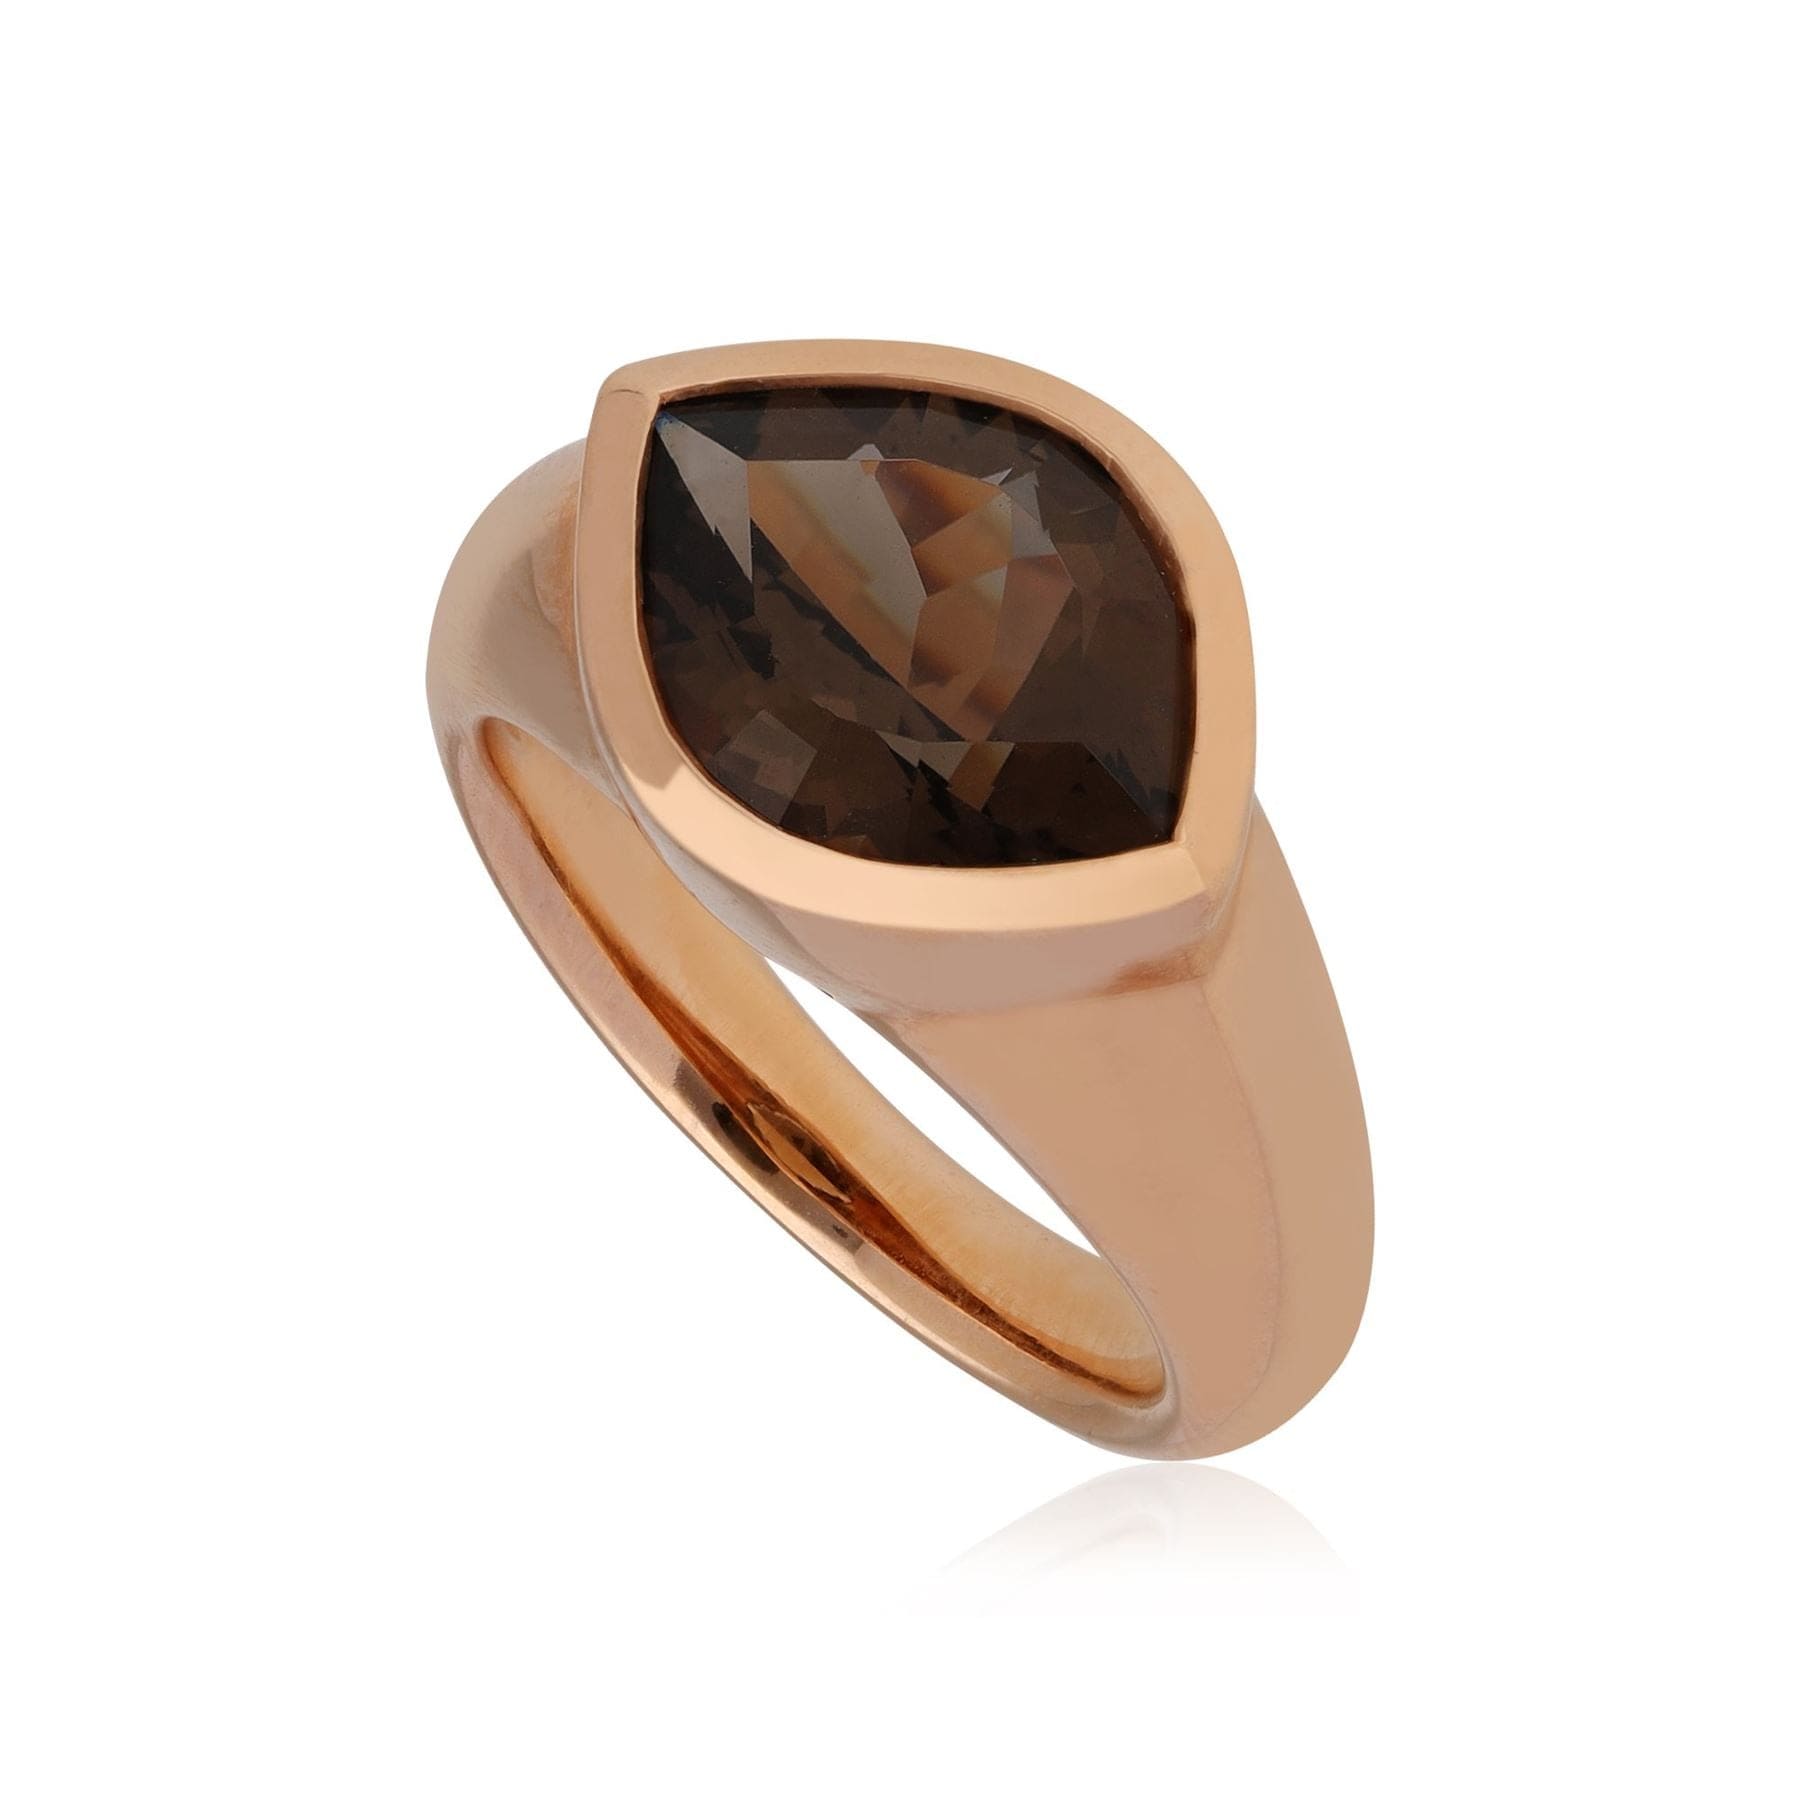 T155R907117 Kosmos Smokey Quartz Cocktail Ring in Rose Gold Plated Sterling Silver 1